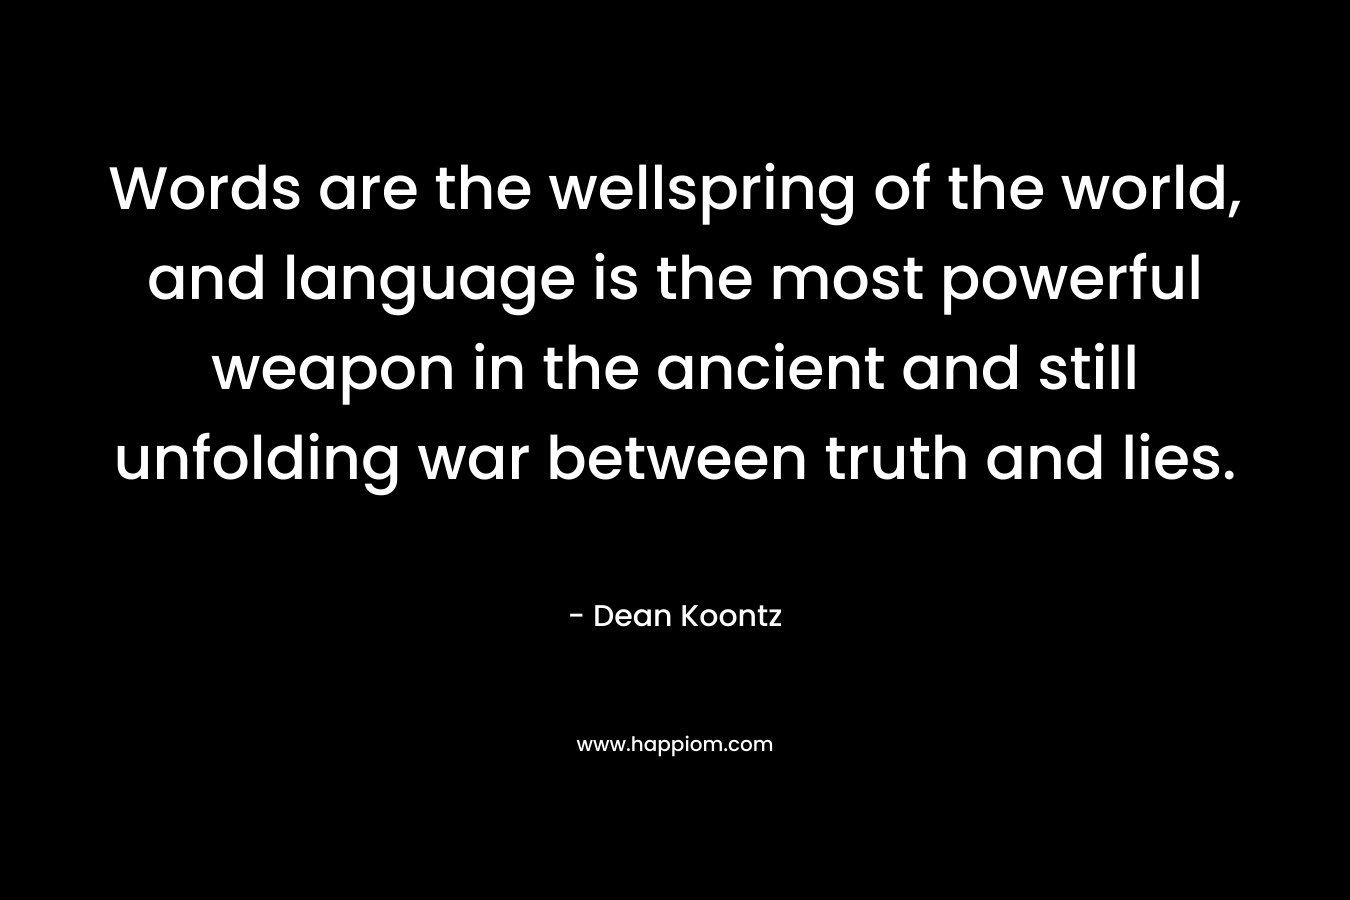 Words are the wellspring of the world, and language is the most powerful weapon in the ancient and still unfolding war between truth and lies.